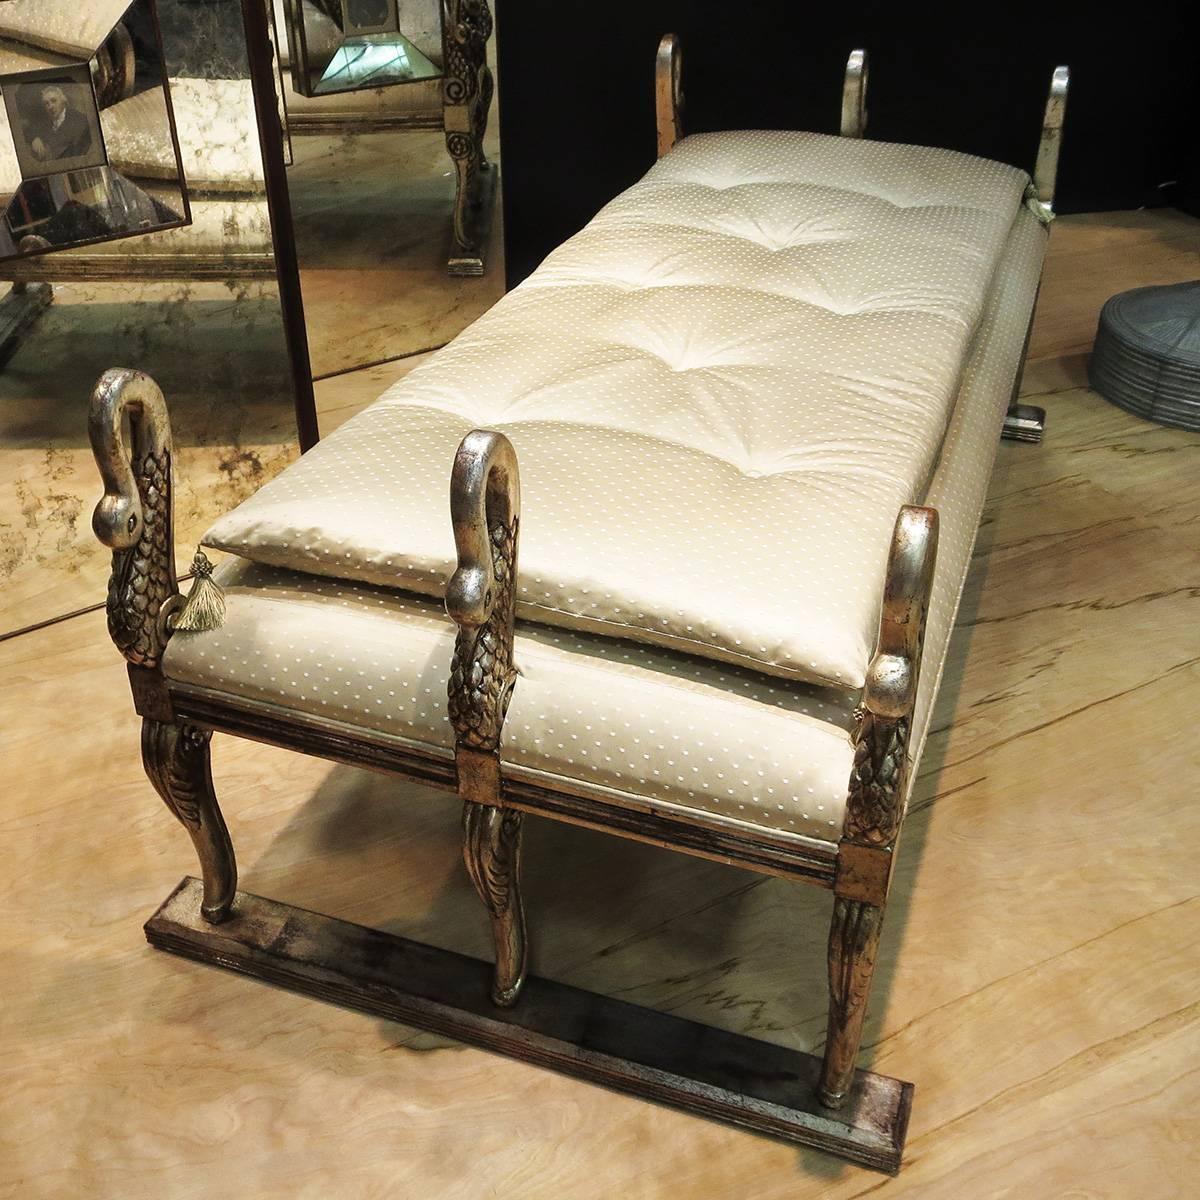 Add a little romance to any room with this fabulous daybed! The body of the bed is carved wood, with six exquisite swans. They have been finished in an antiqued silver leaf, to great effect. The upholstery has been re-done in a high sheen cream